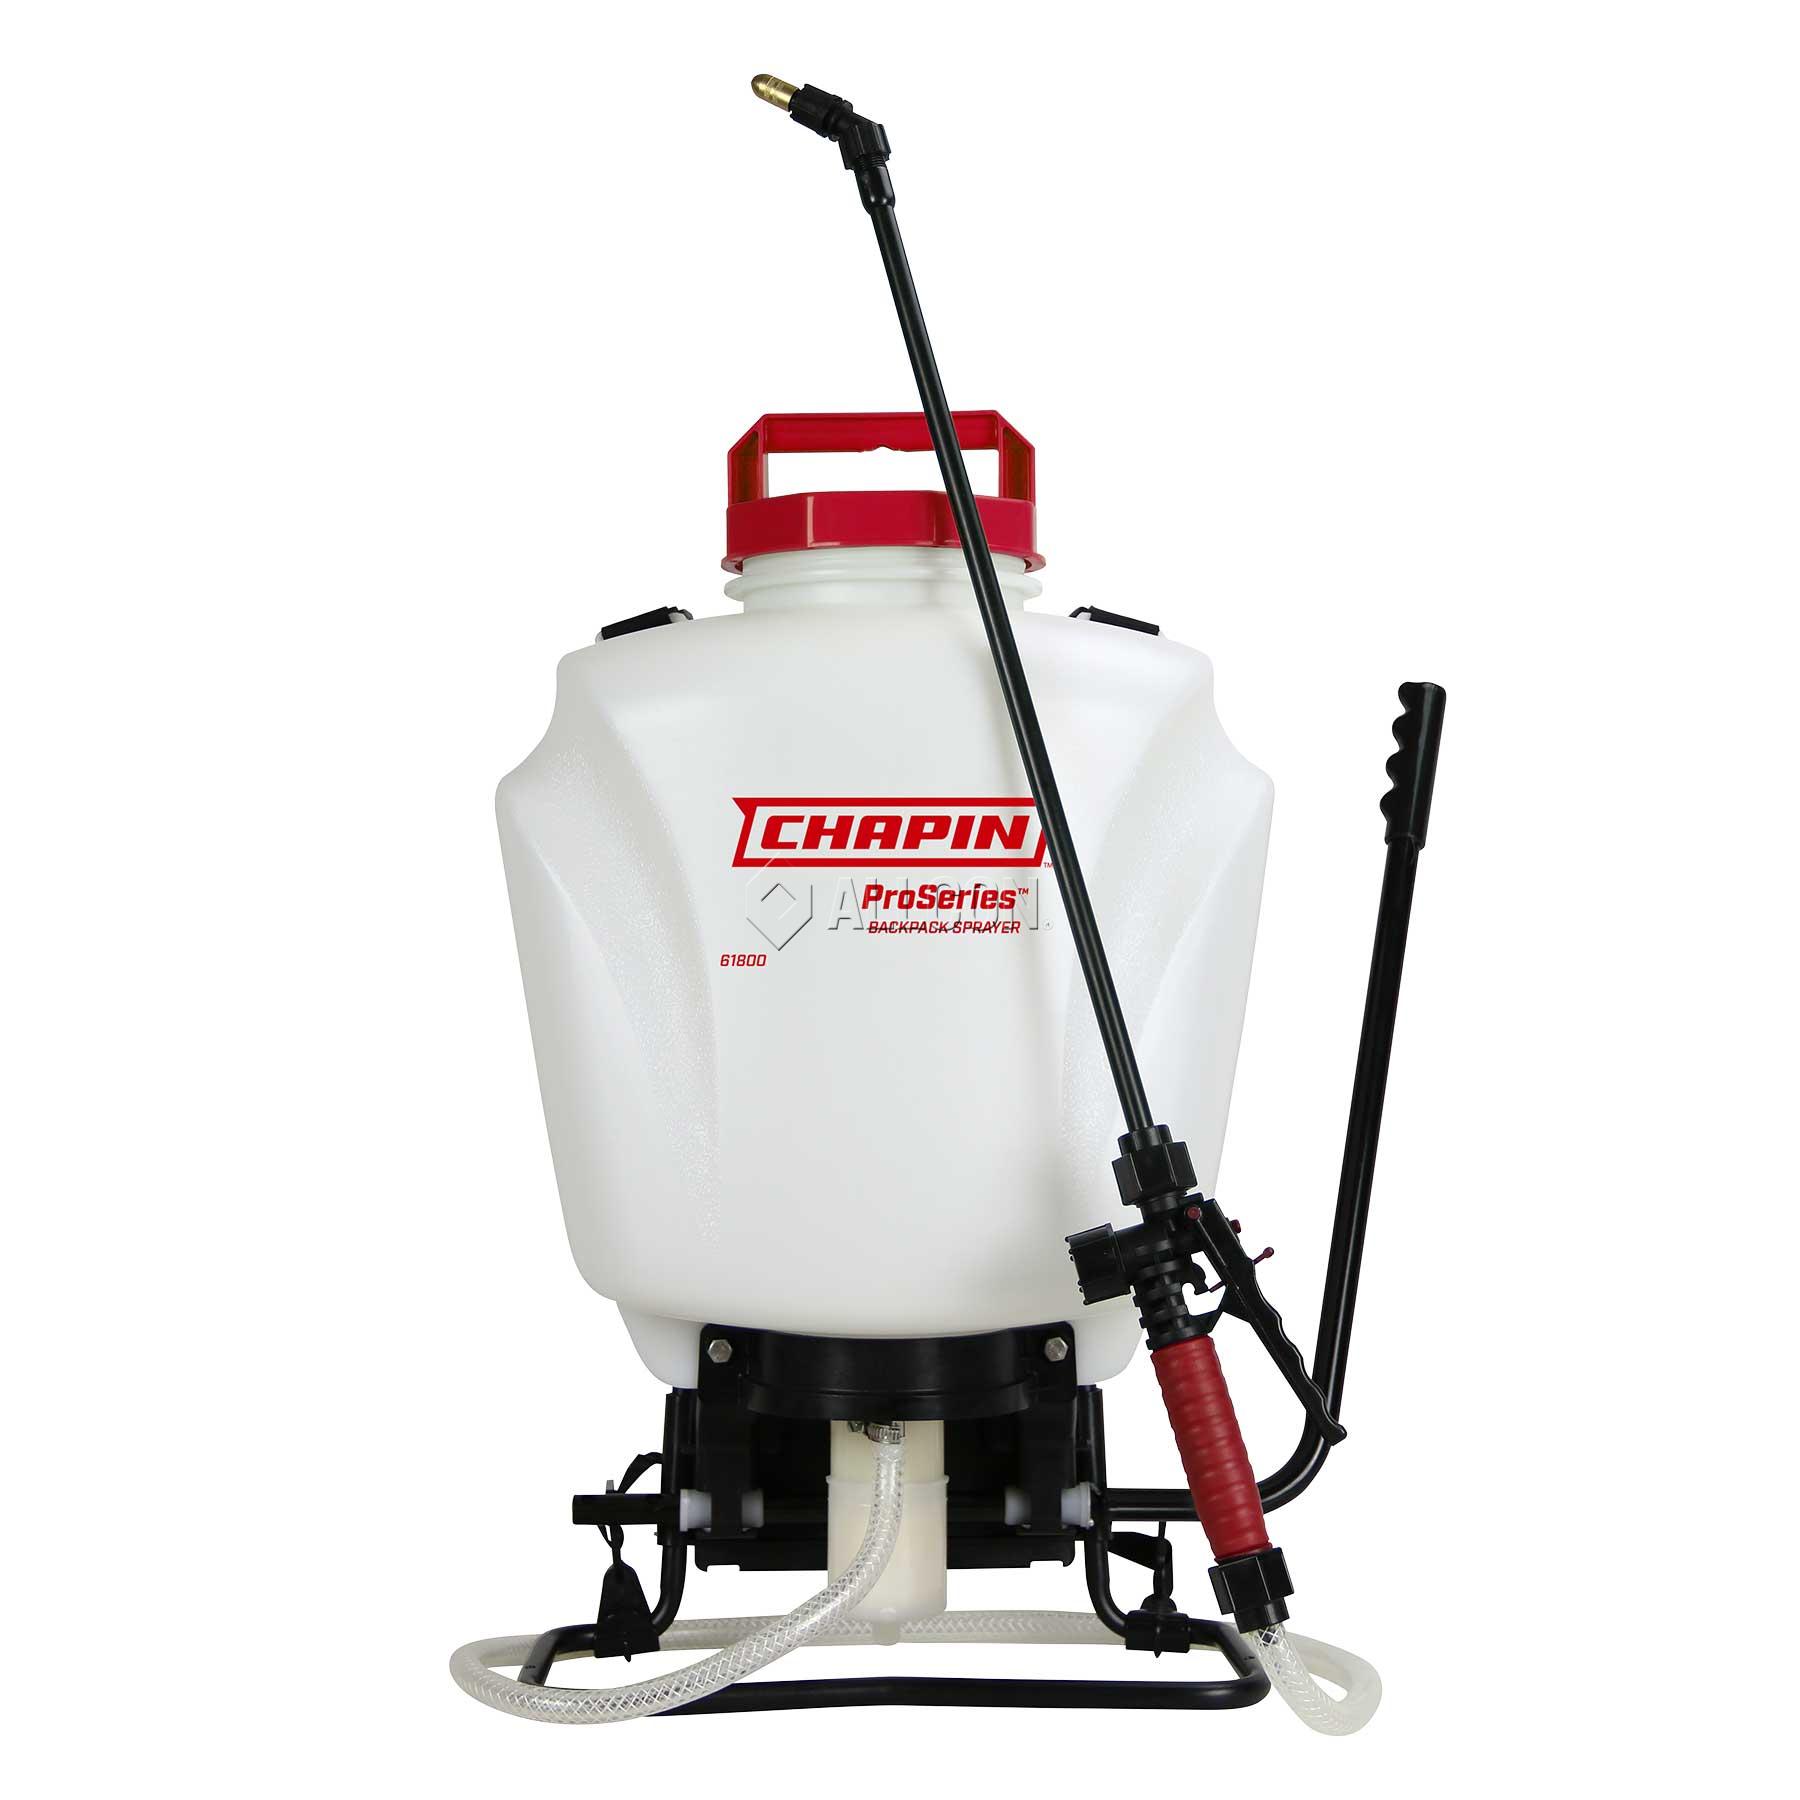 Chapin 15L Backpack Sprayer